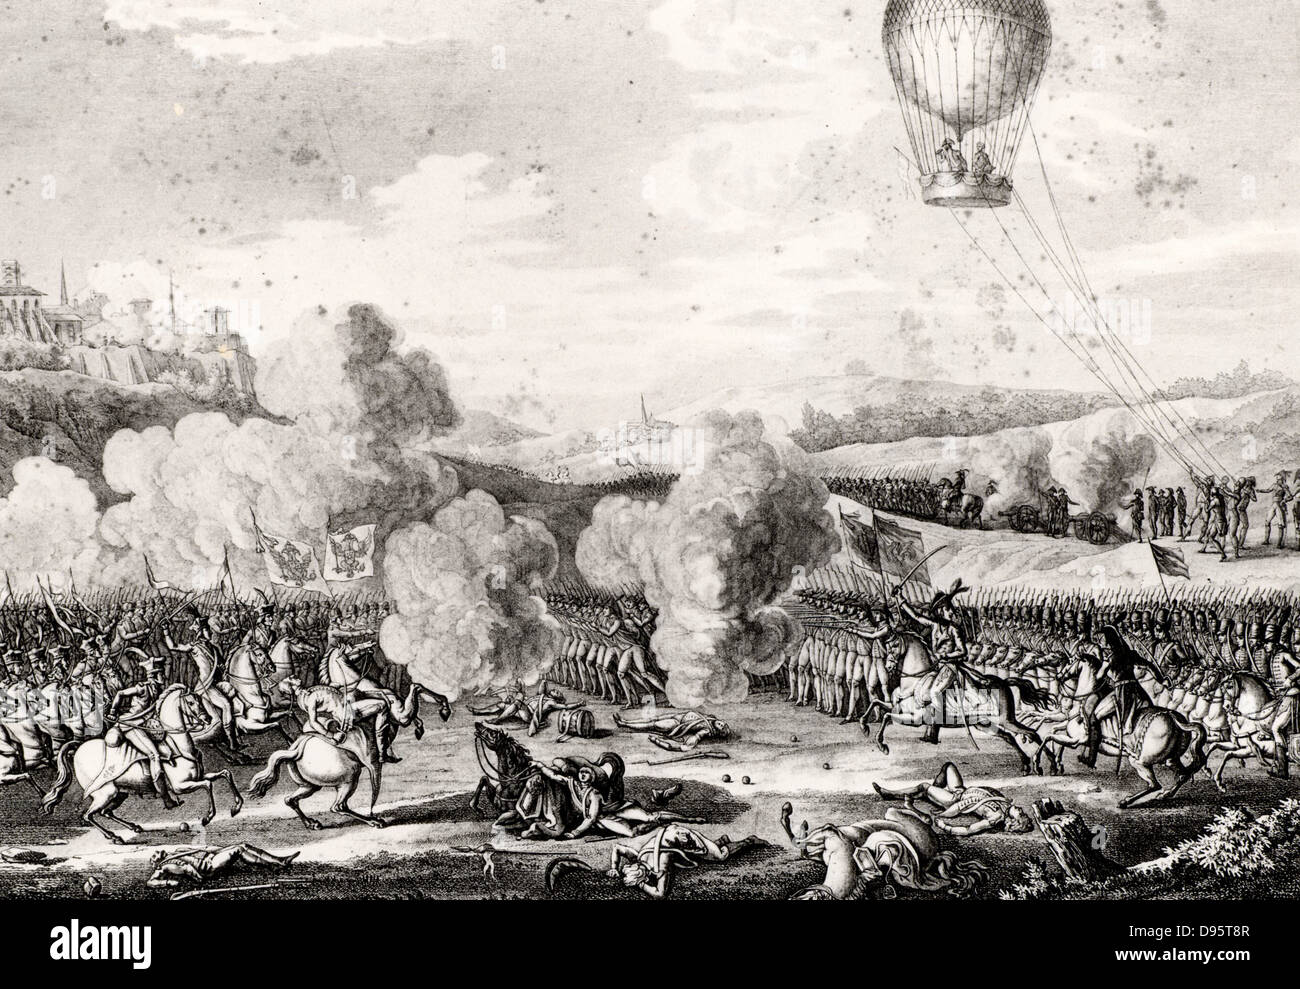 Battle of Fleurus 26 June 1794. French Revolutionary Wars. French defeat of the Austrians, Dutch, and their allies. The first use of a hot air balloon for aerial observation during a battle.  French captive balloon 'La Entreprenant' on right. From contemporary copperplate engraving. Stock Photo